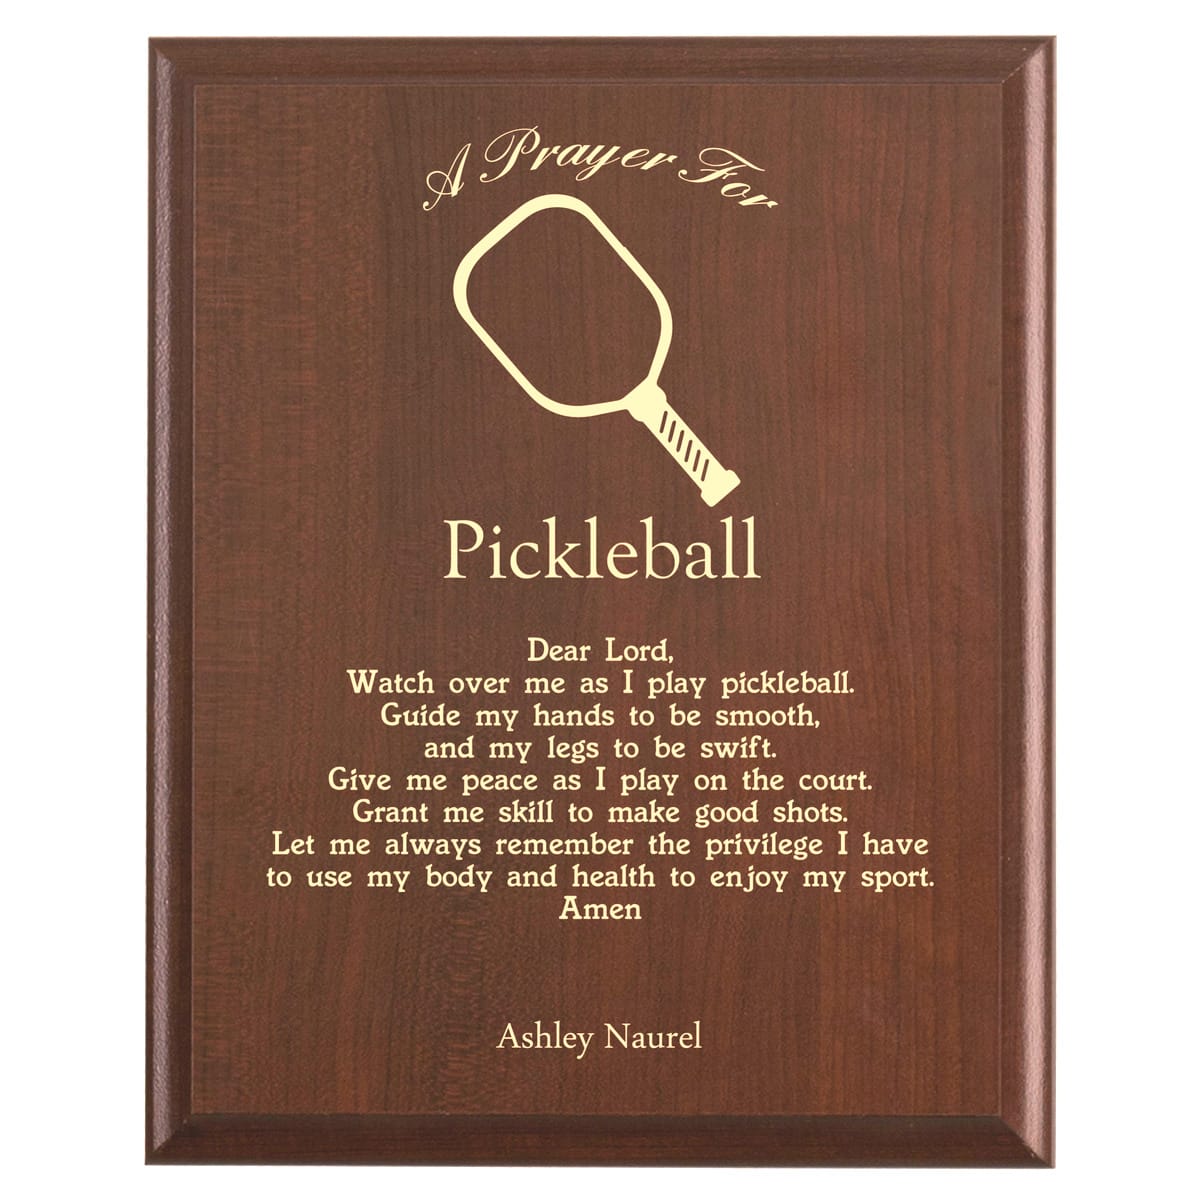 Plaque photo: Pickleball Prayer Plaque design with free personalization. Wood style finish with customized text.